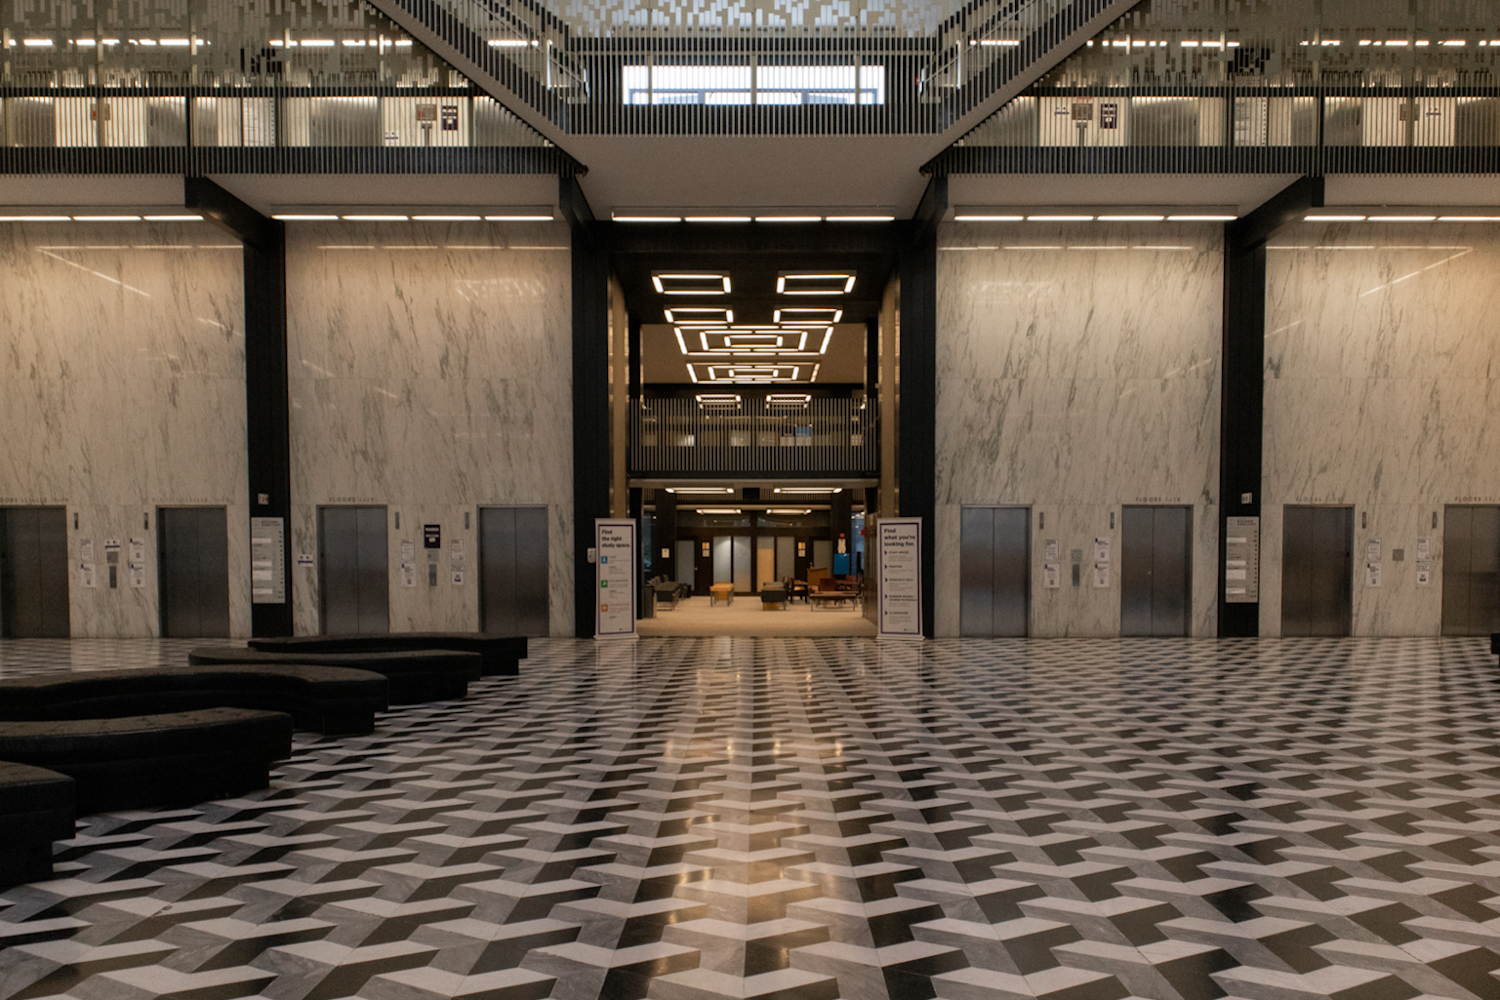 A photo of the empty Bobst Library lobby with the entrance to the study area in the center, a graphic ceramic floor, several black leather bench couches on the left, and eight elevators against the marble walls.